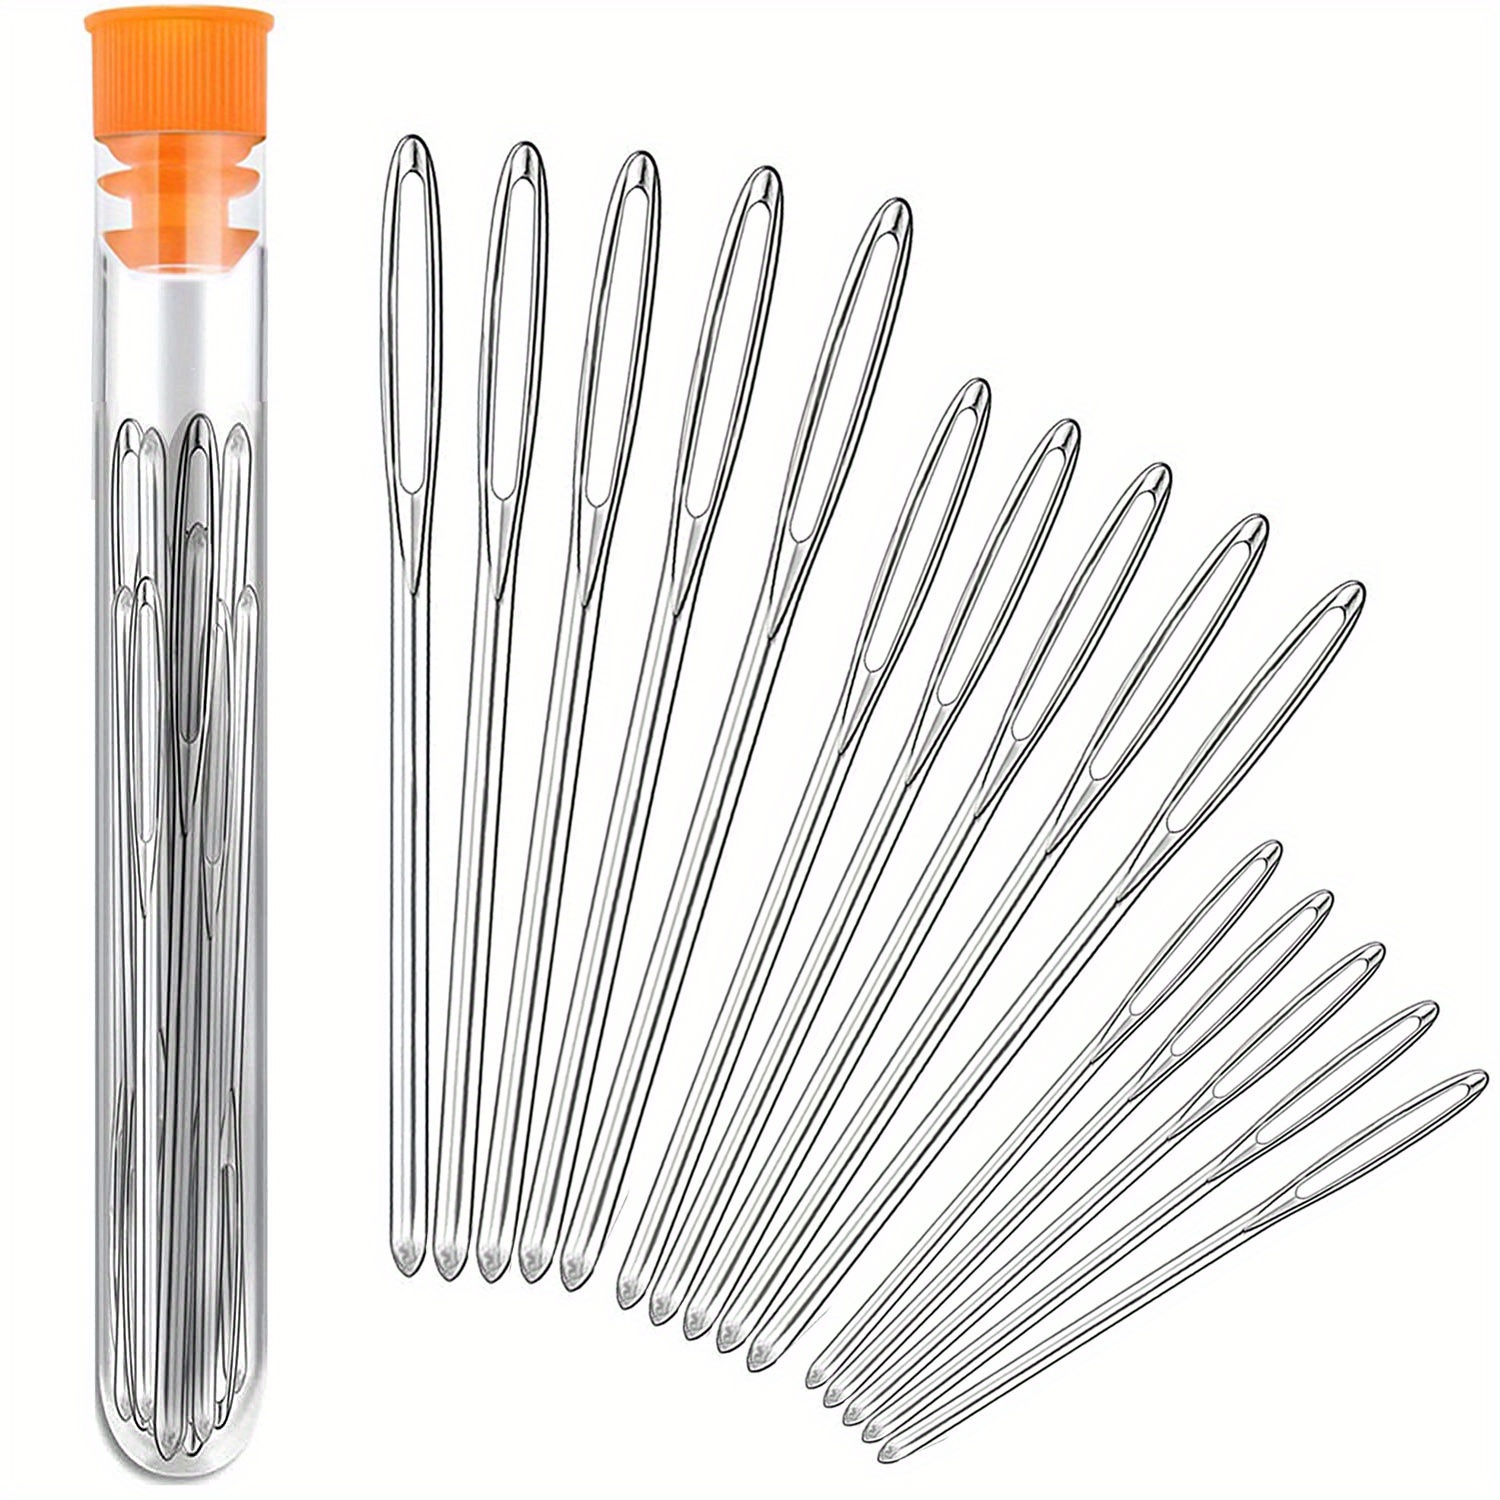 Outus Large-Eye Blunt Needles Steel Yarn Knitting Needles Sewing Needles, 9 Pieces (Silver)